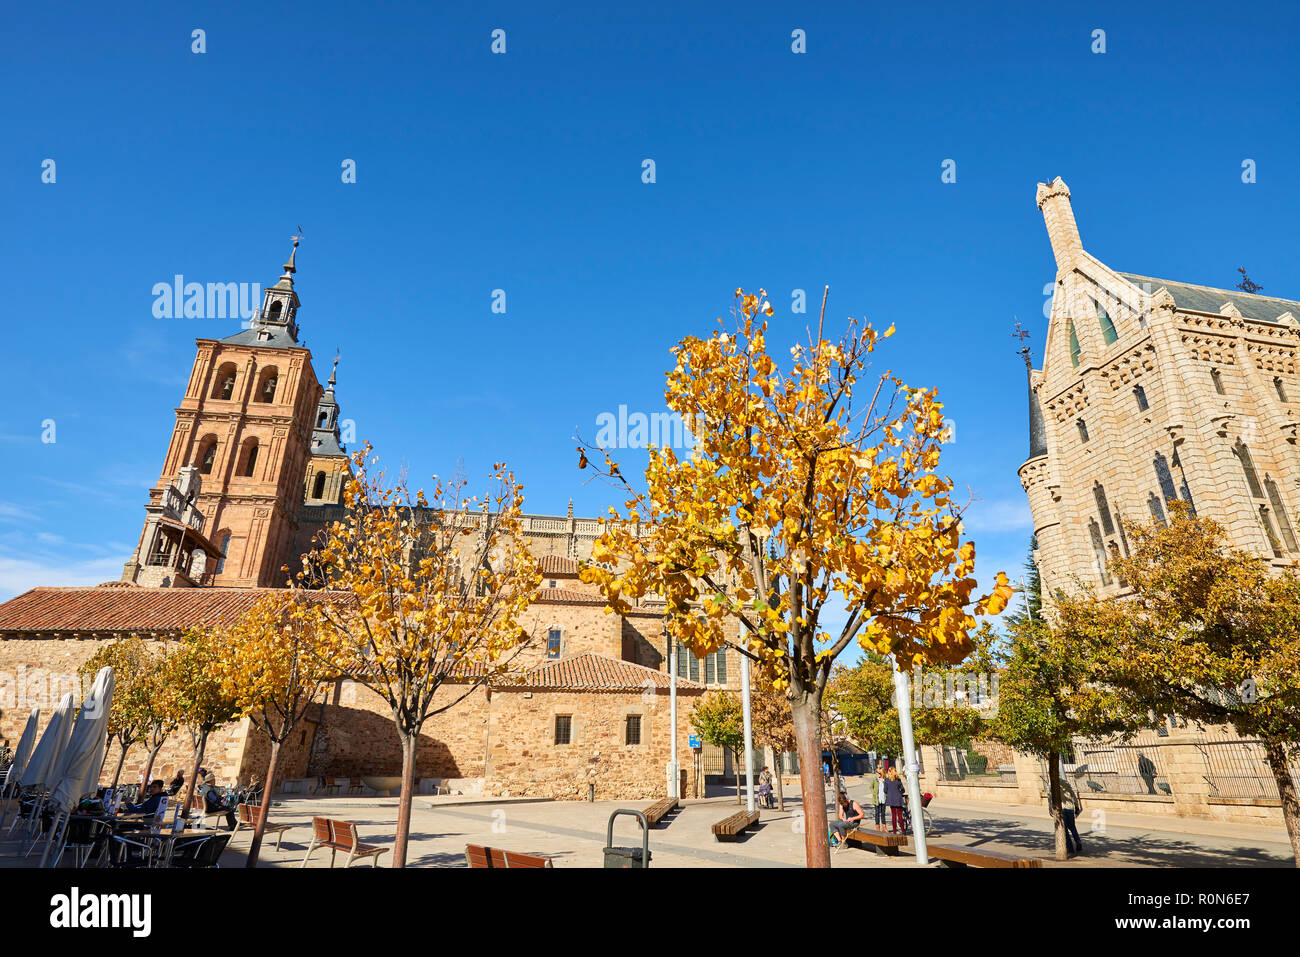 View of the Cathedral of Santa Maria from the Eduardo de Castro Square in Astorga, Way of St. James, Leon, Spain Stock Photo